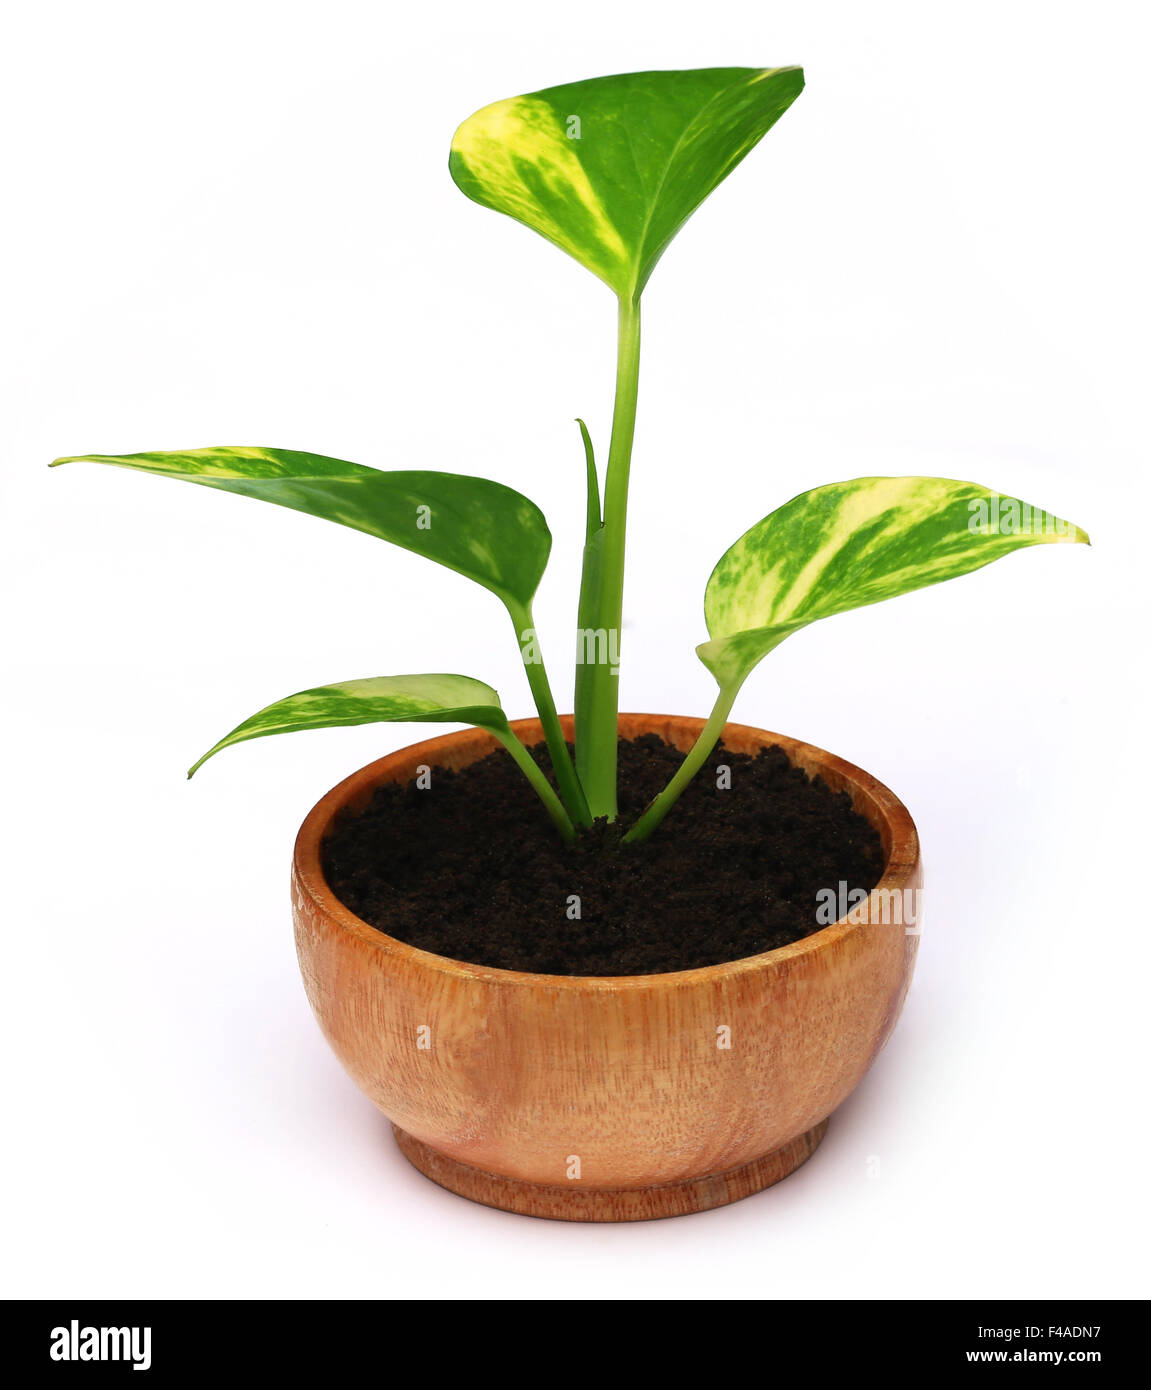 Money plant in a wooden bowl Stock Photo